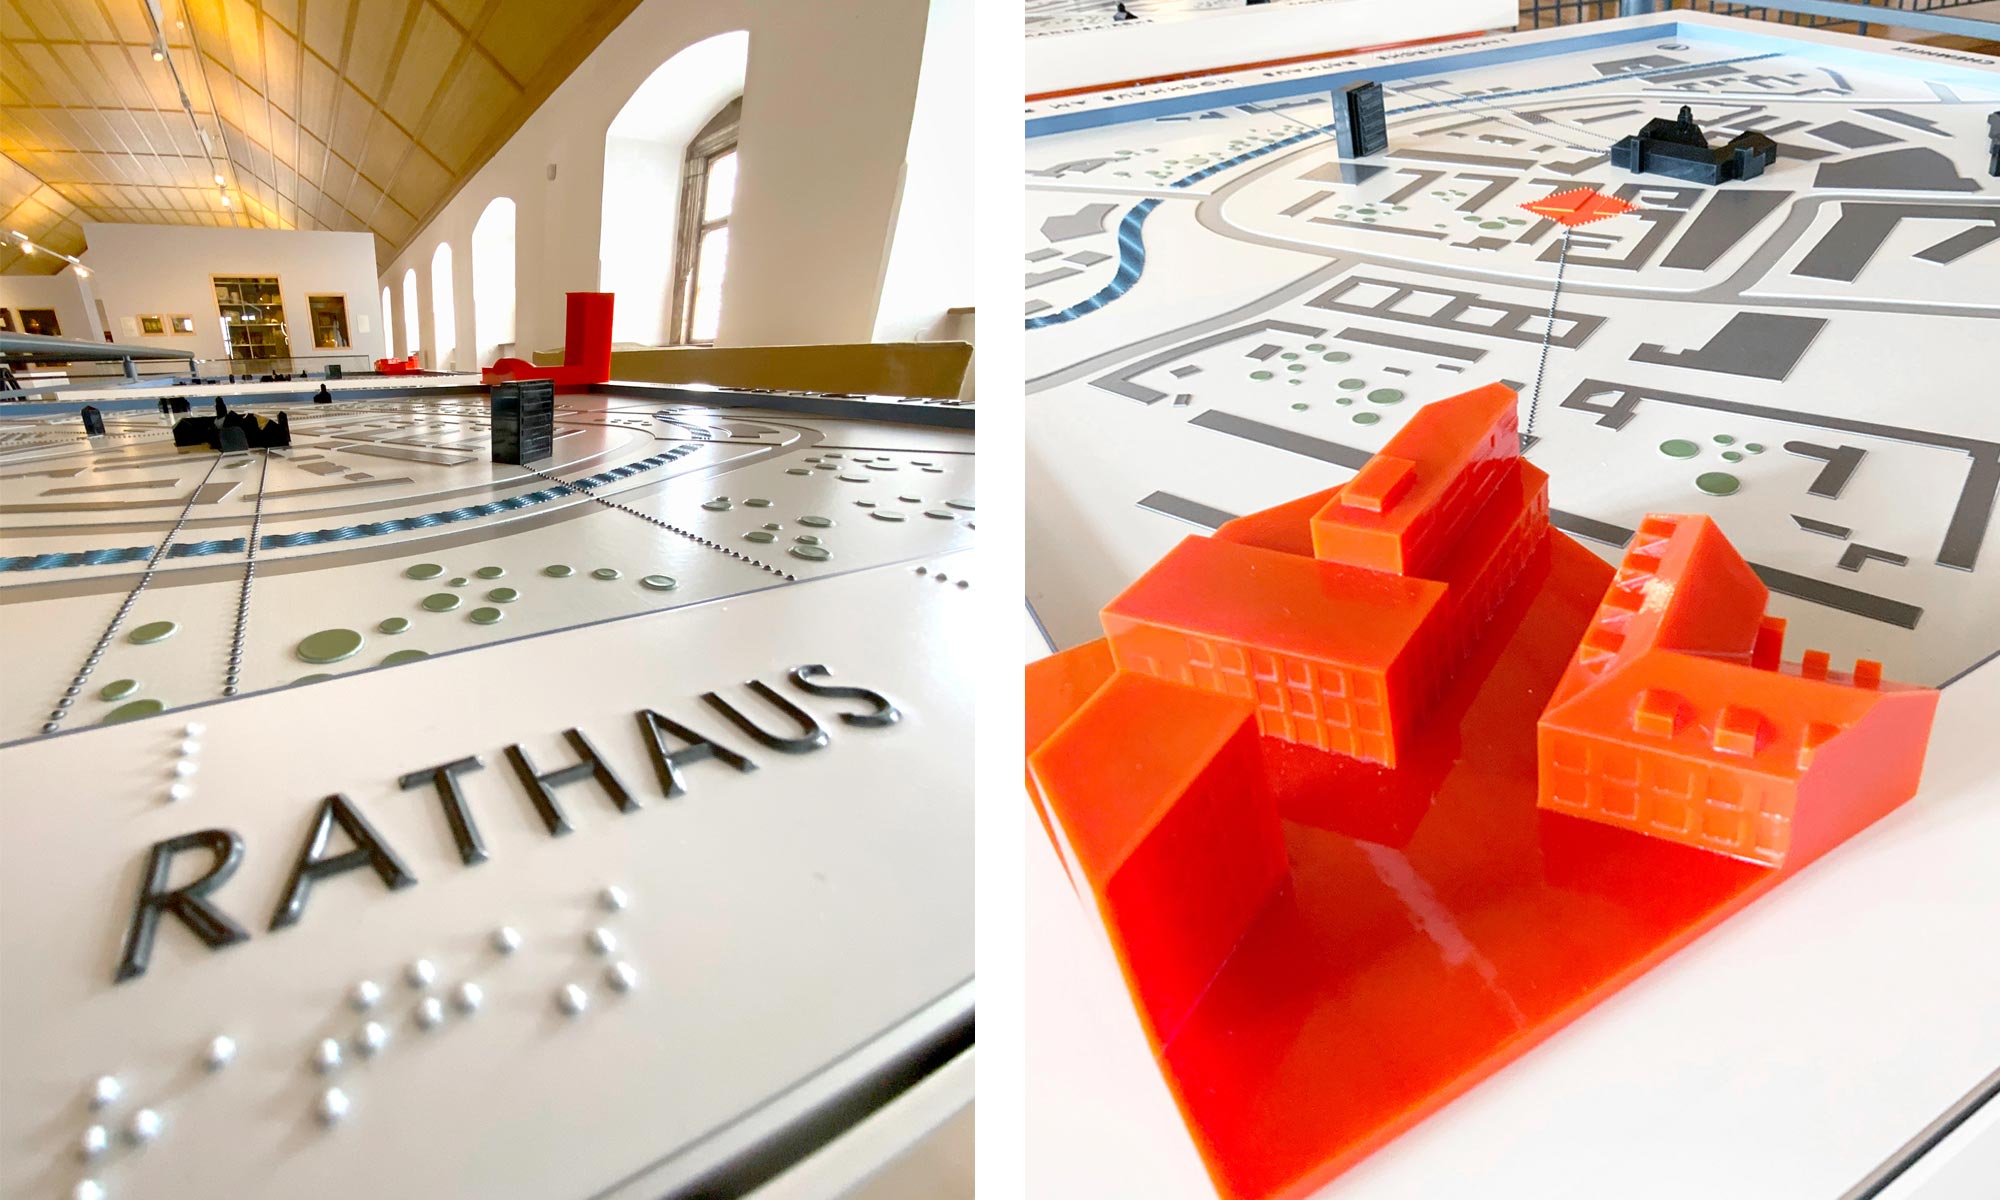 Two close-up photos: On the left, a legend of the model - the word "Rathaus" as a high-contrast, tactile inscription and in Braille lettering. On the right, some houses as an enlarged detail.